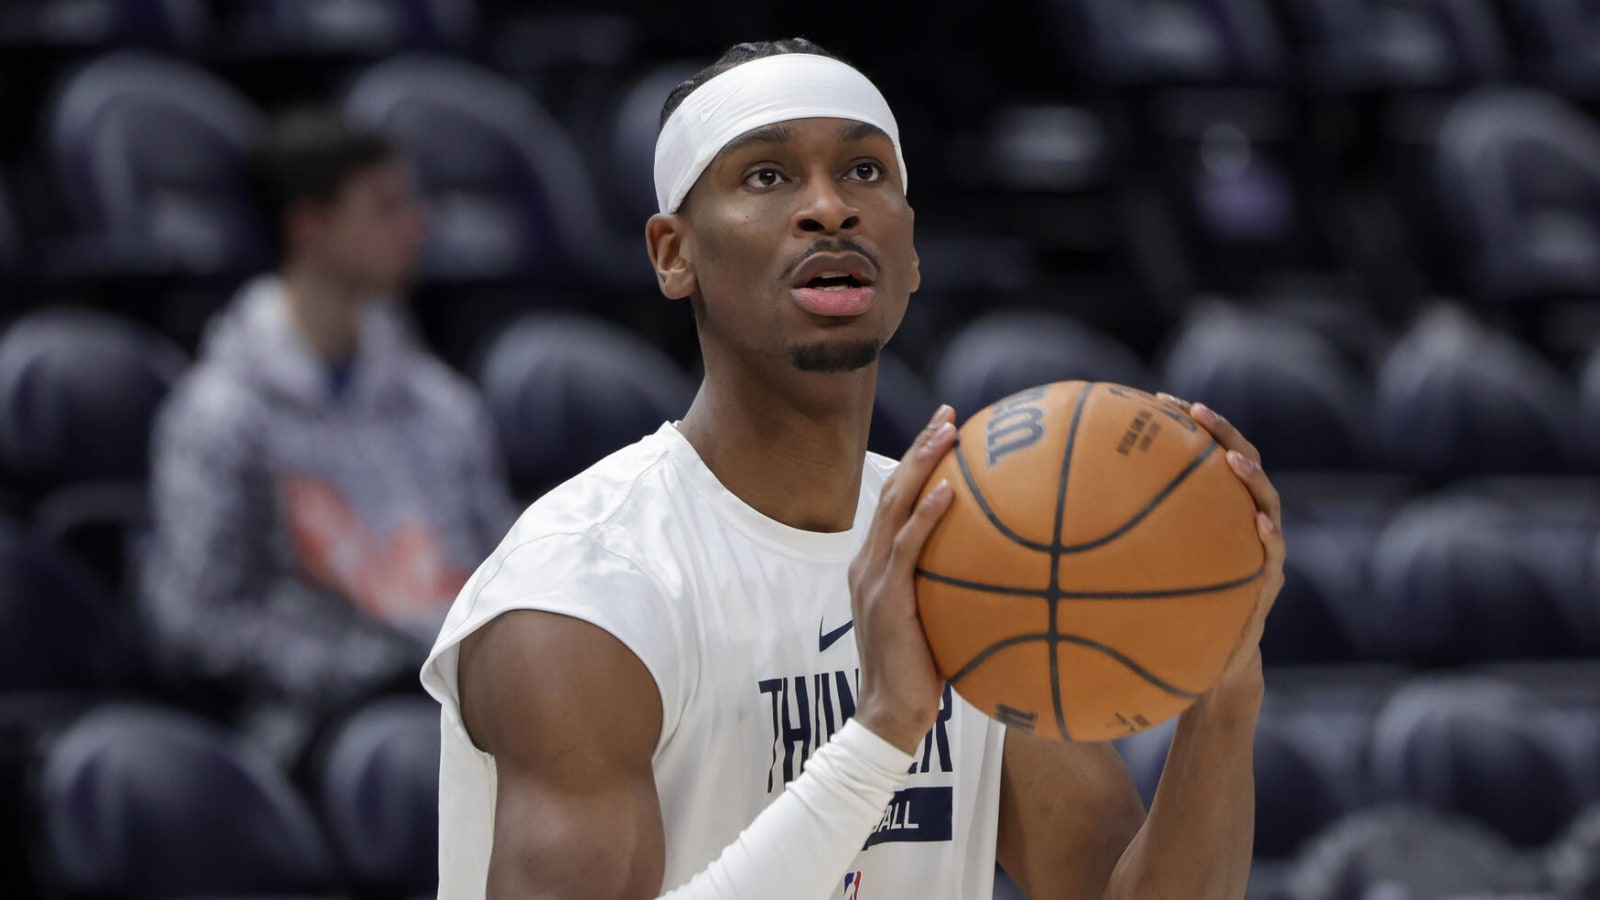 Could this NBA rising star sign a $400M contract?